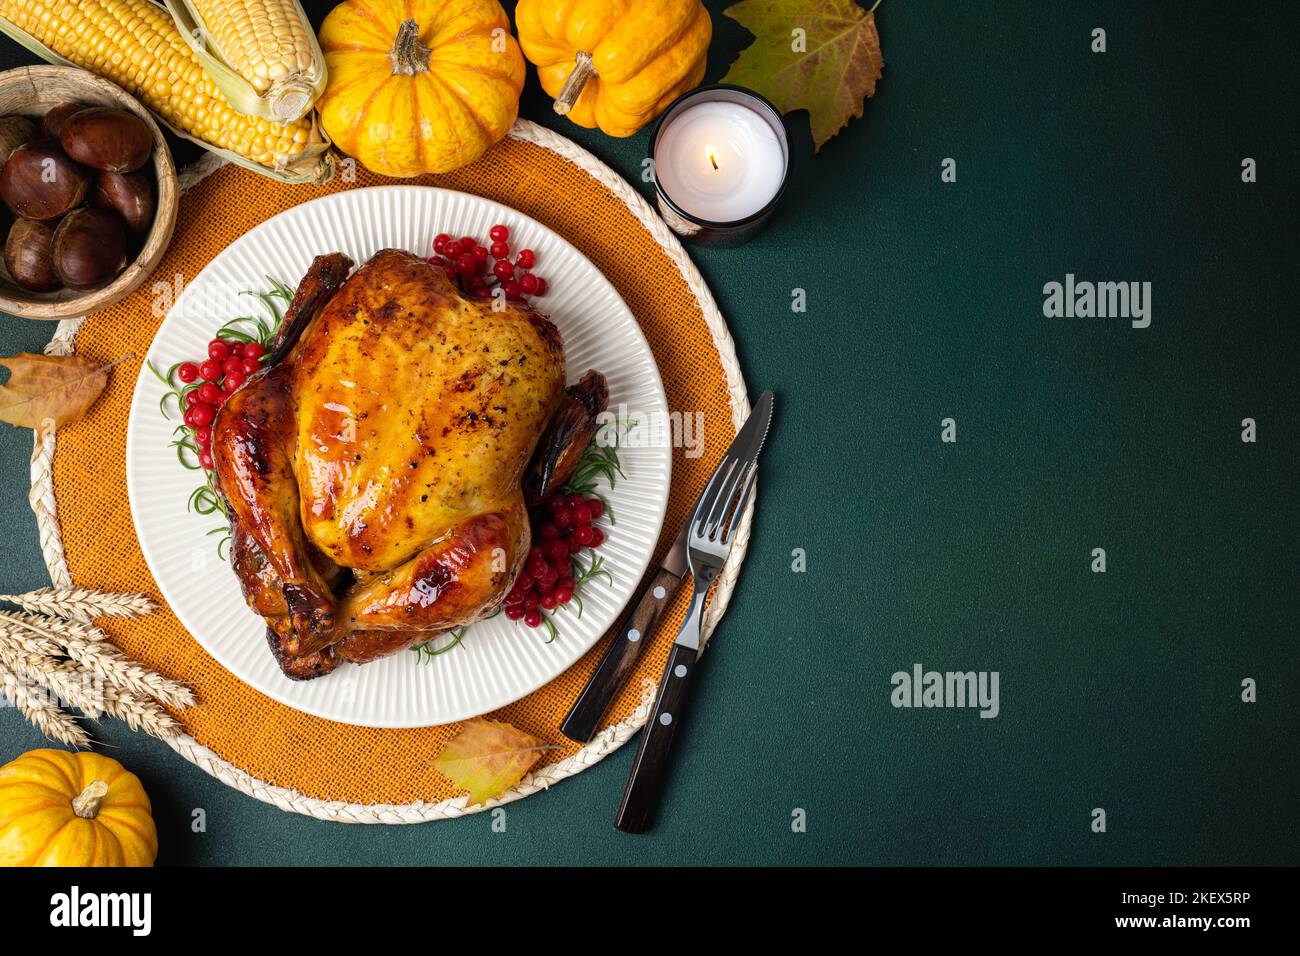 Happy Thanksgiving holiday background. Roasted whole chicken or turkey with autumn vegetables for thanksgiving dinner on dark background Stock Photo